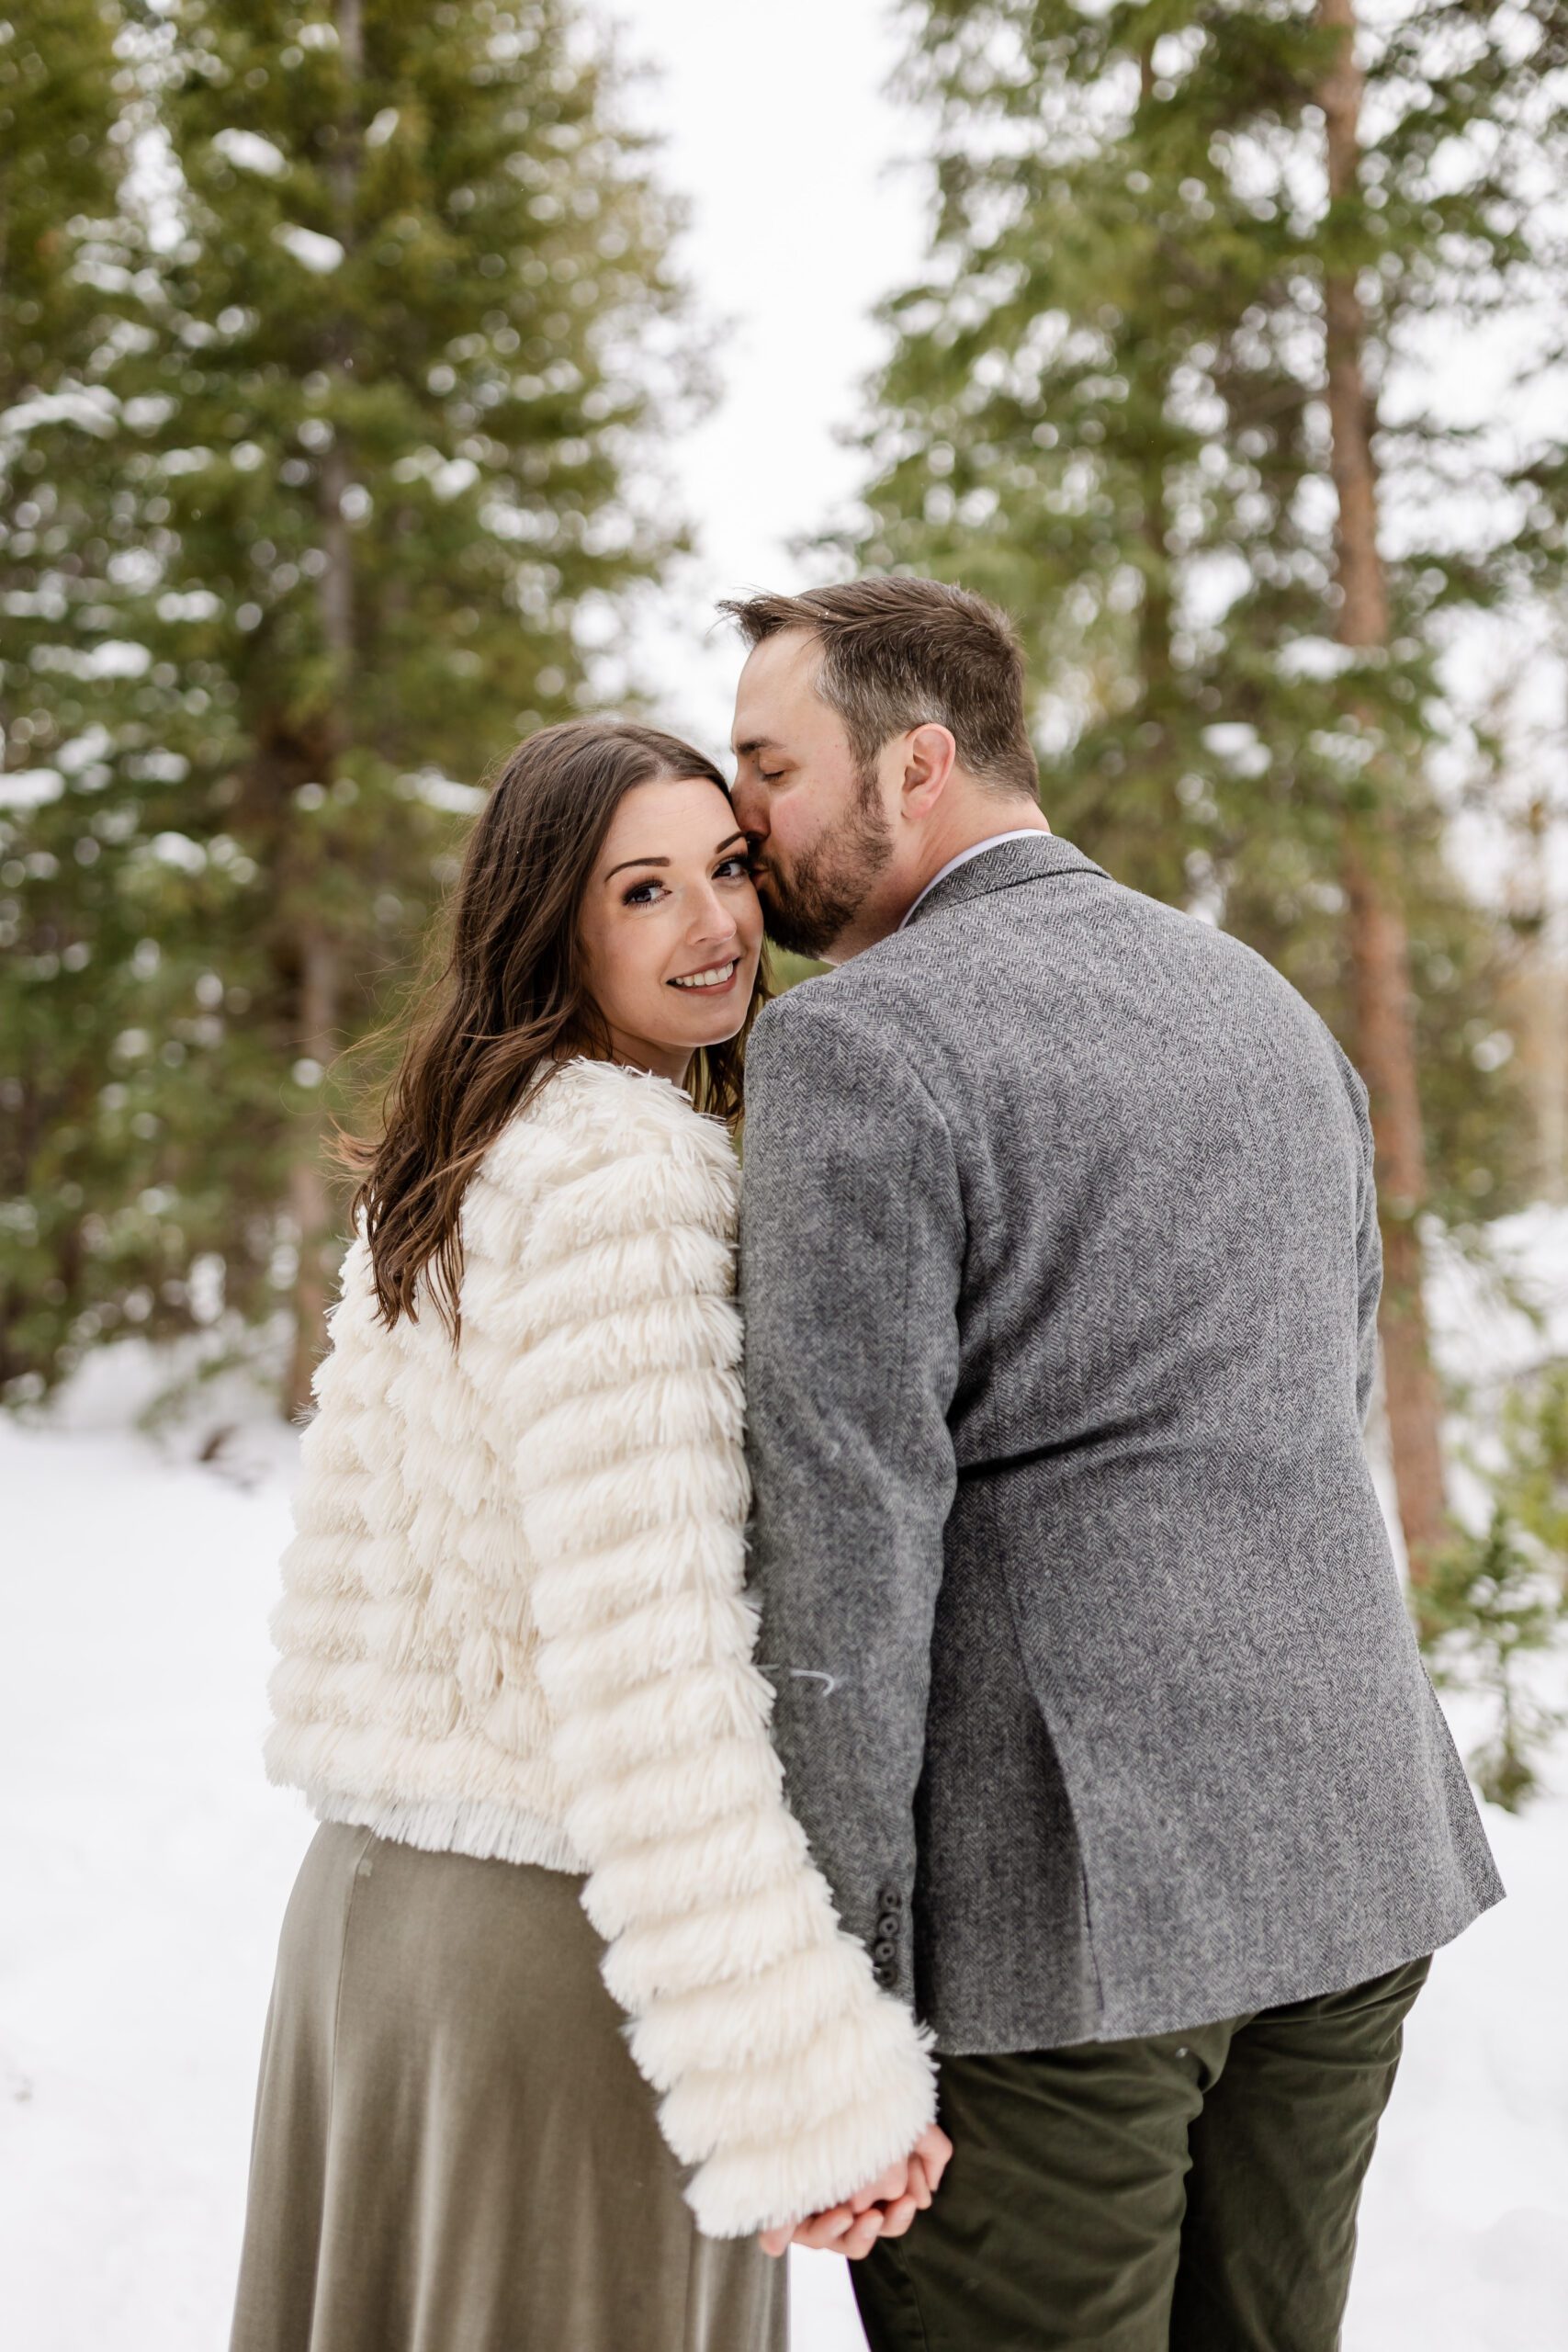 the bride smiles at the camera,  the groom kisses her on the cheek at their Winter Park elopement.